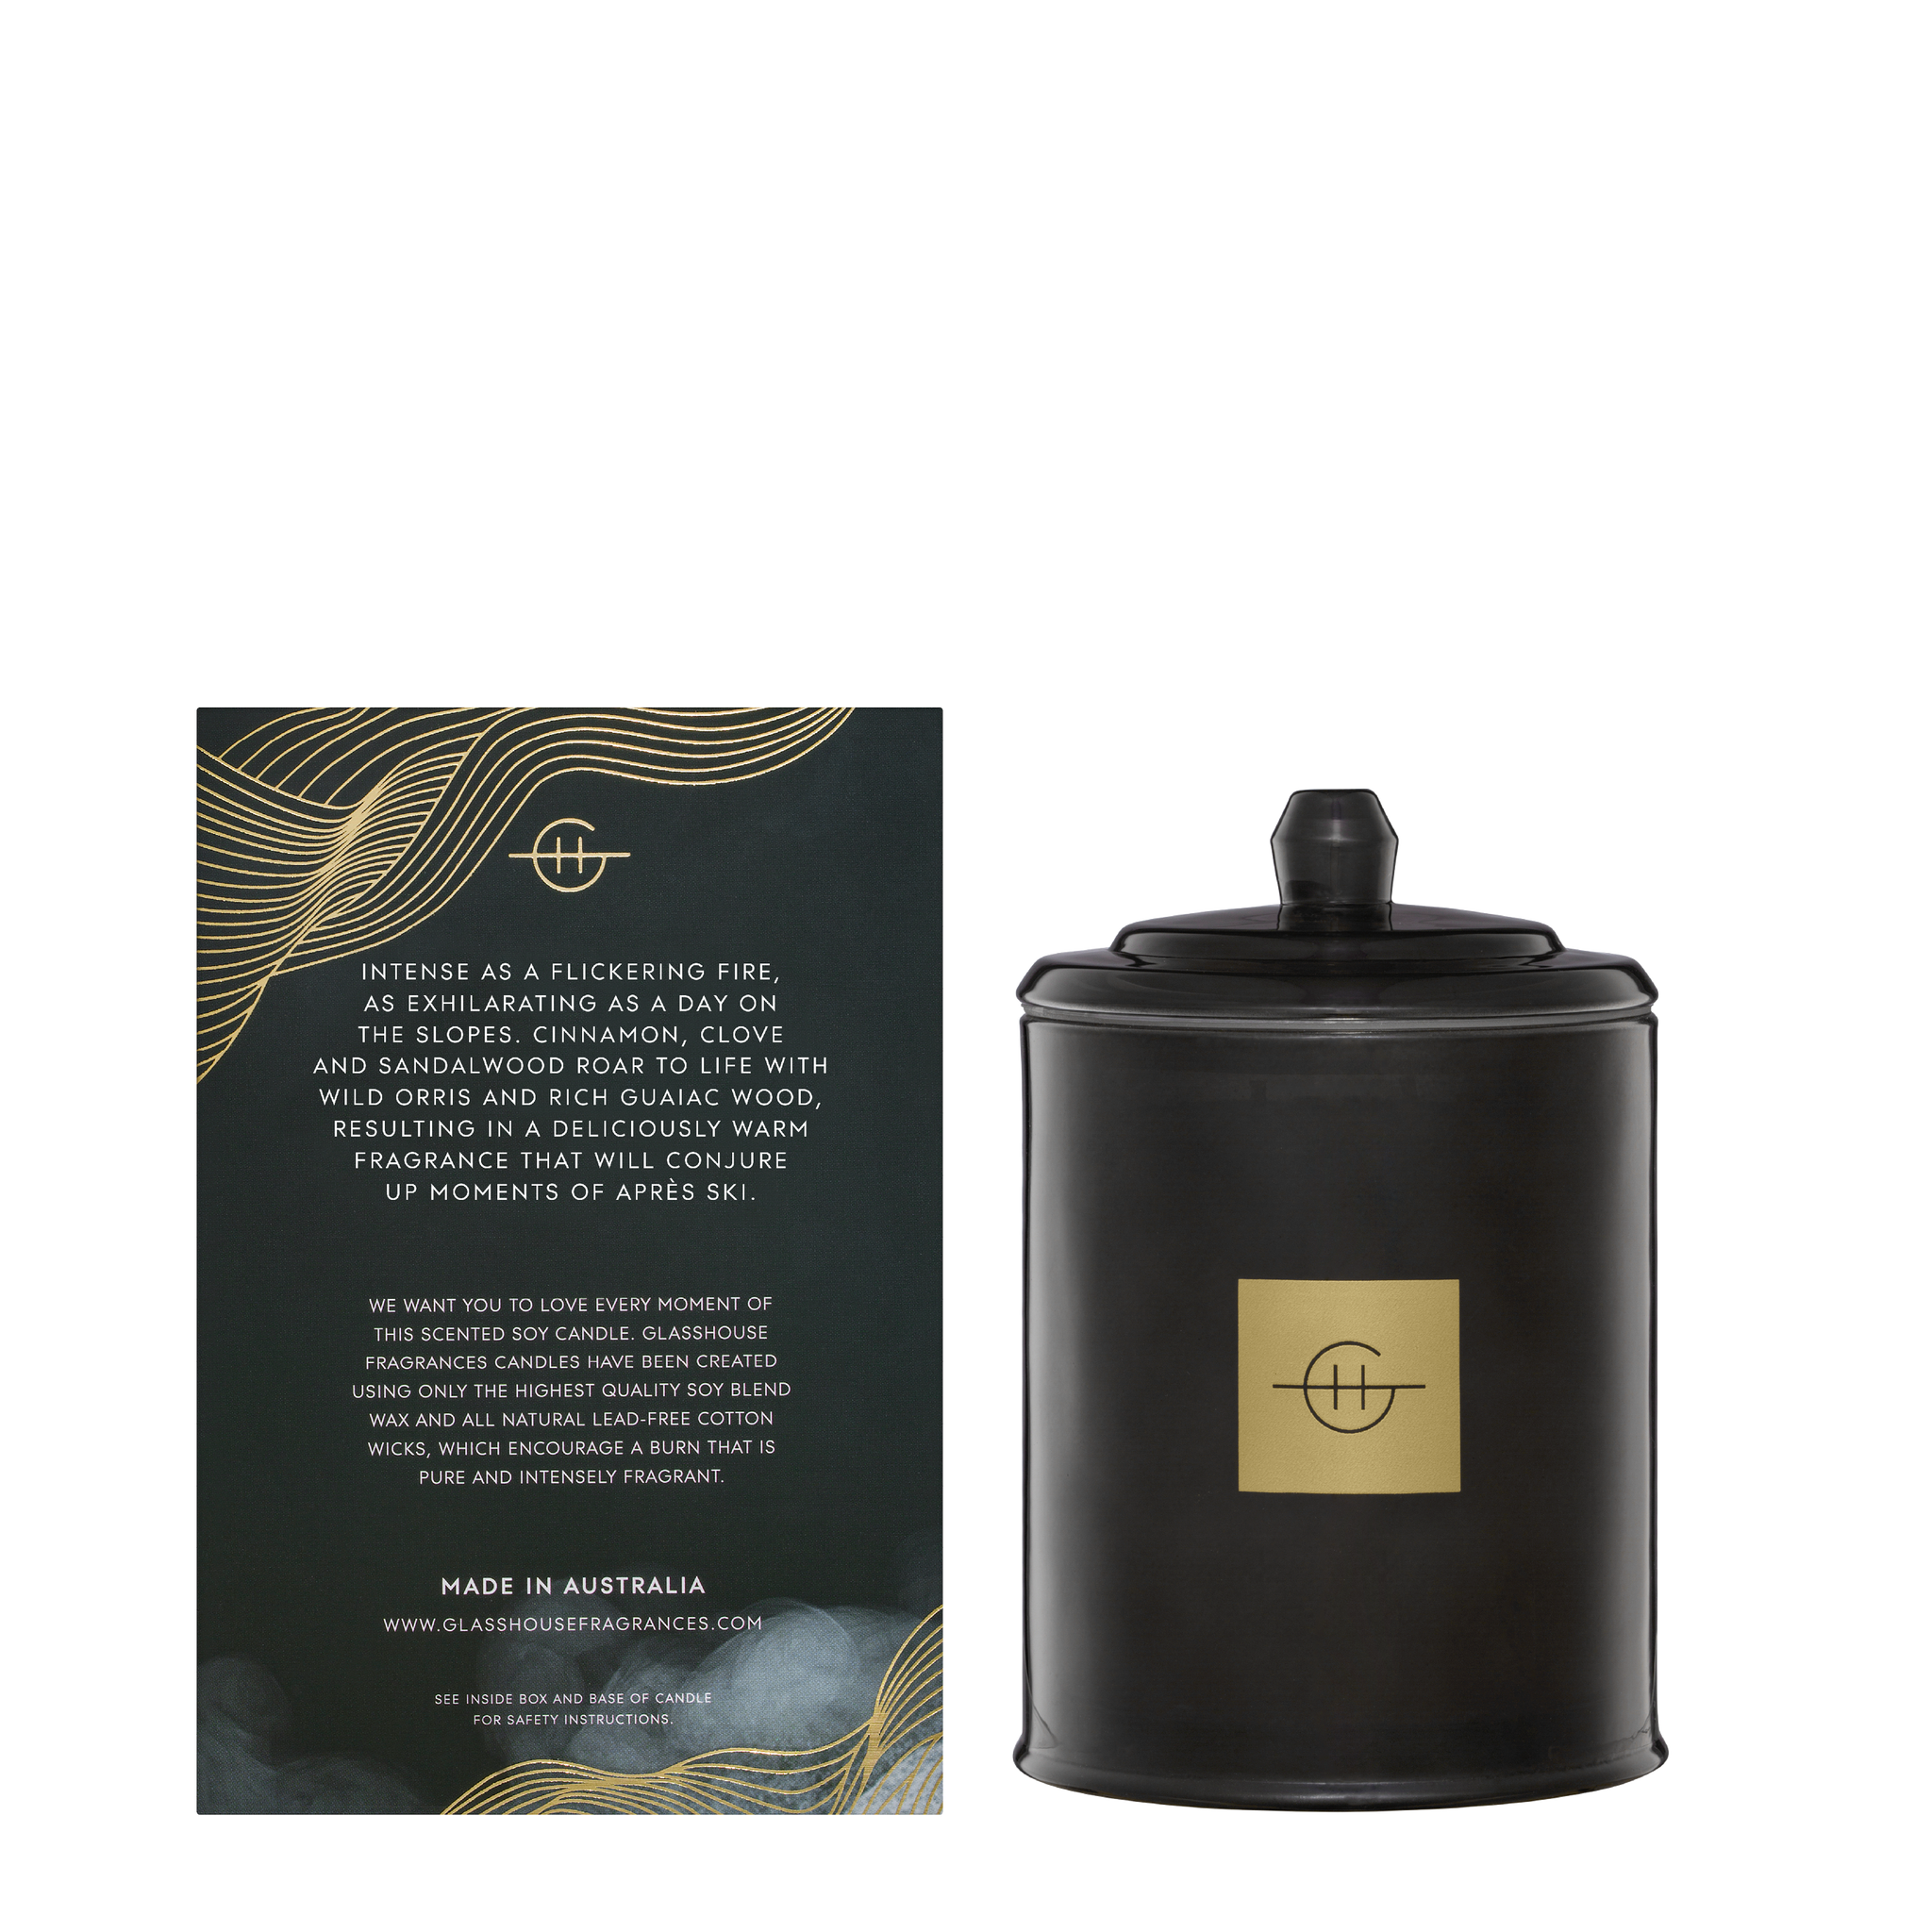 Glasshouse Fragrances Fireside In Queenstown 380g Triple Soy Candle back of product